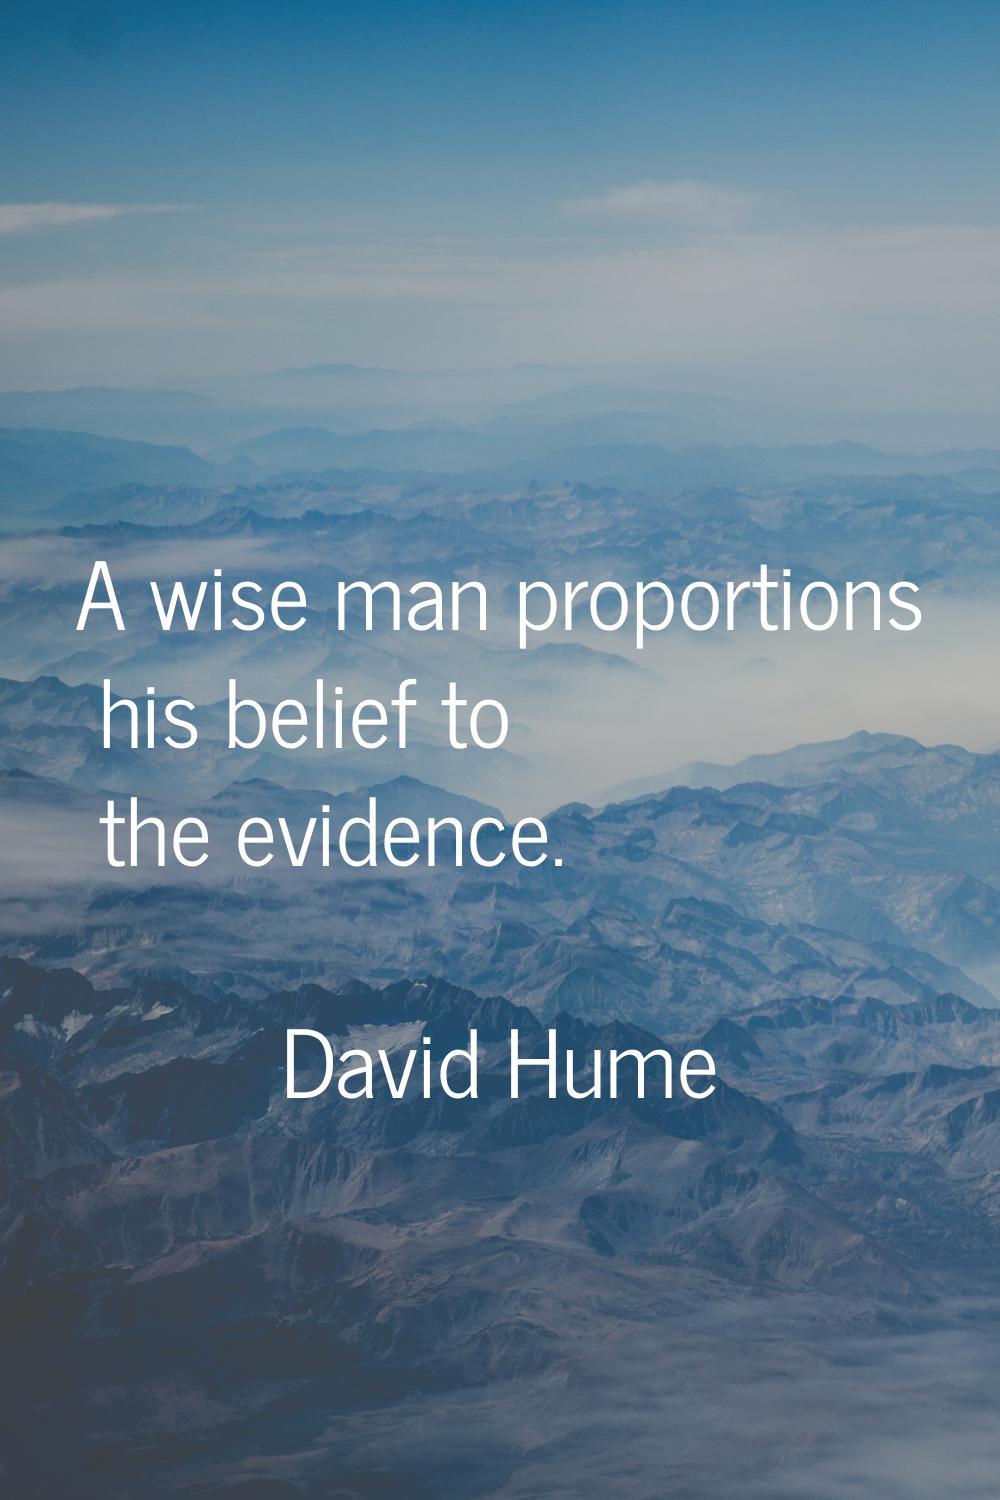 A wise man proportions his belief to the evidence.